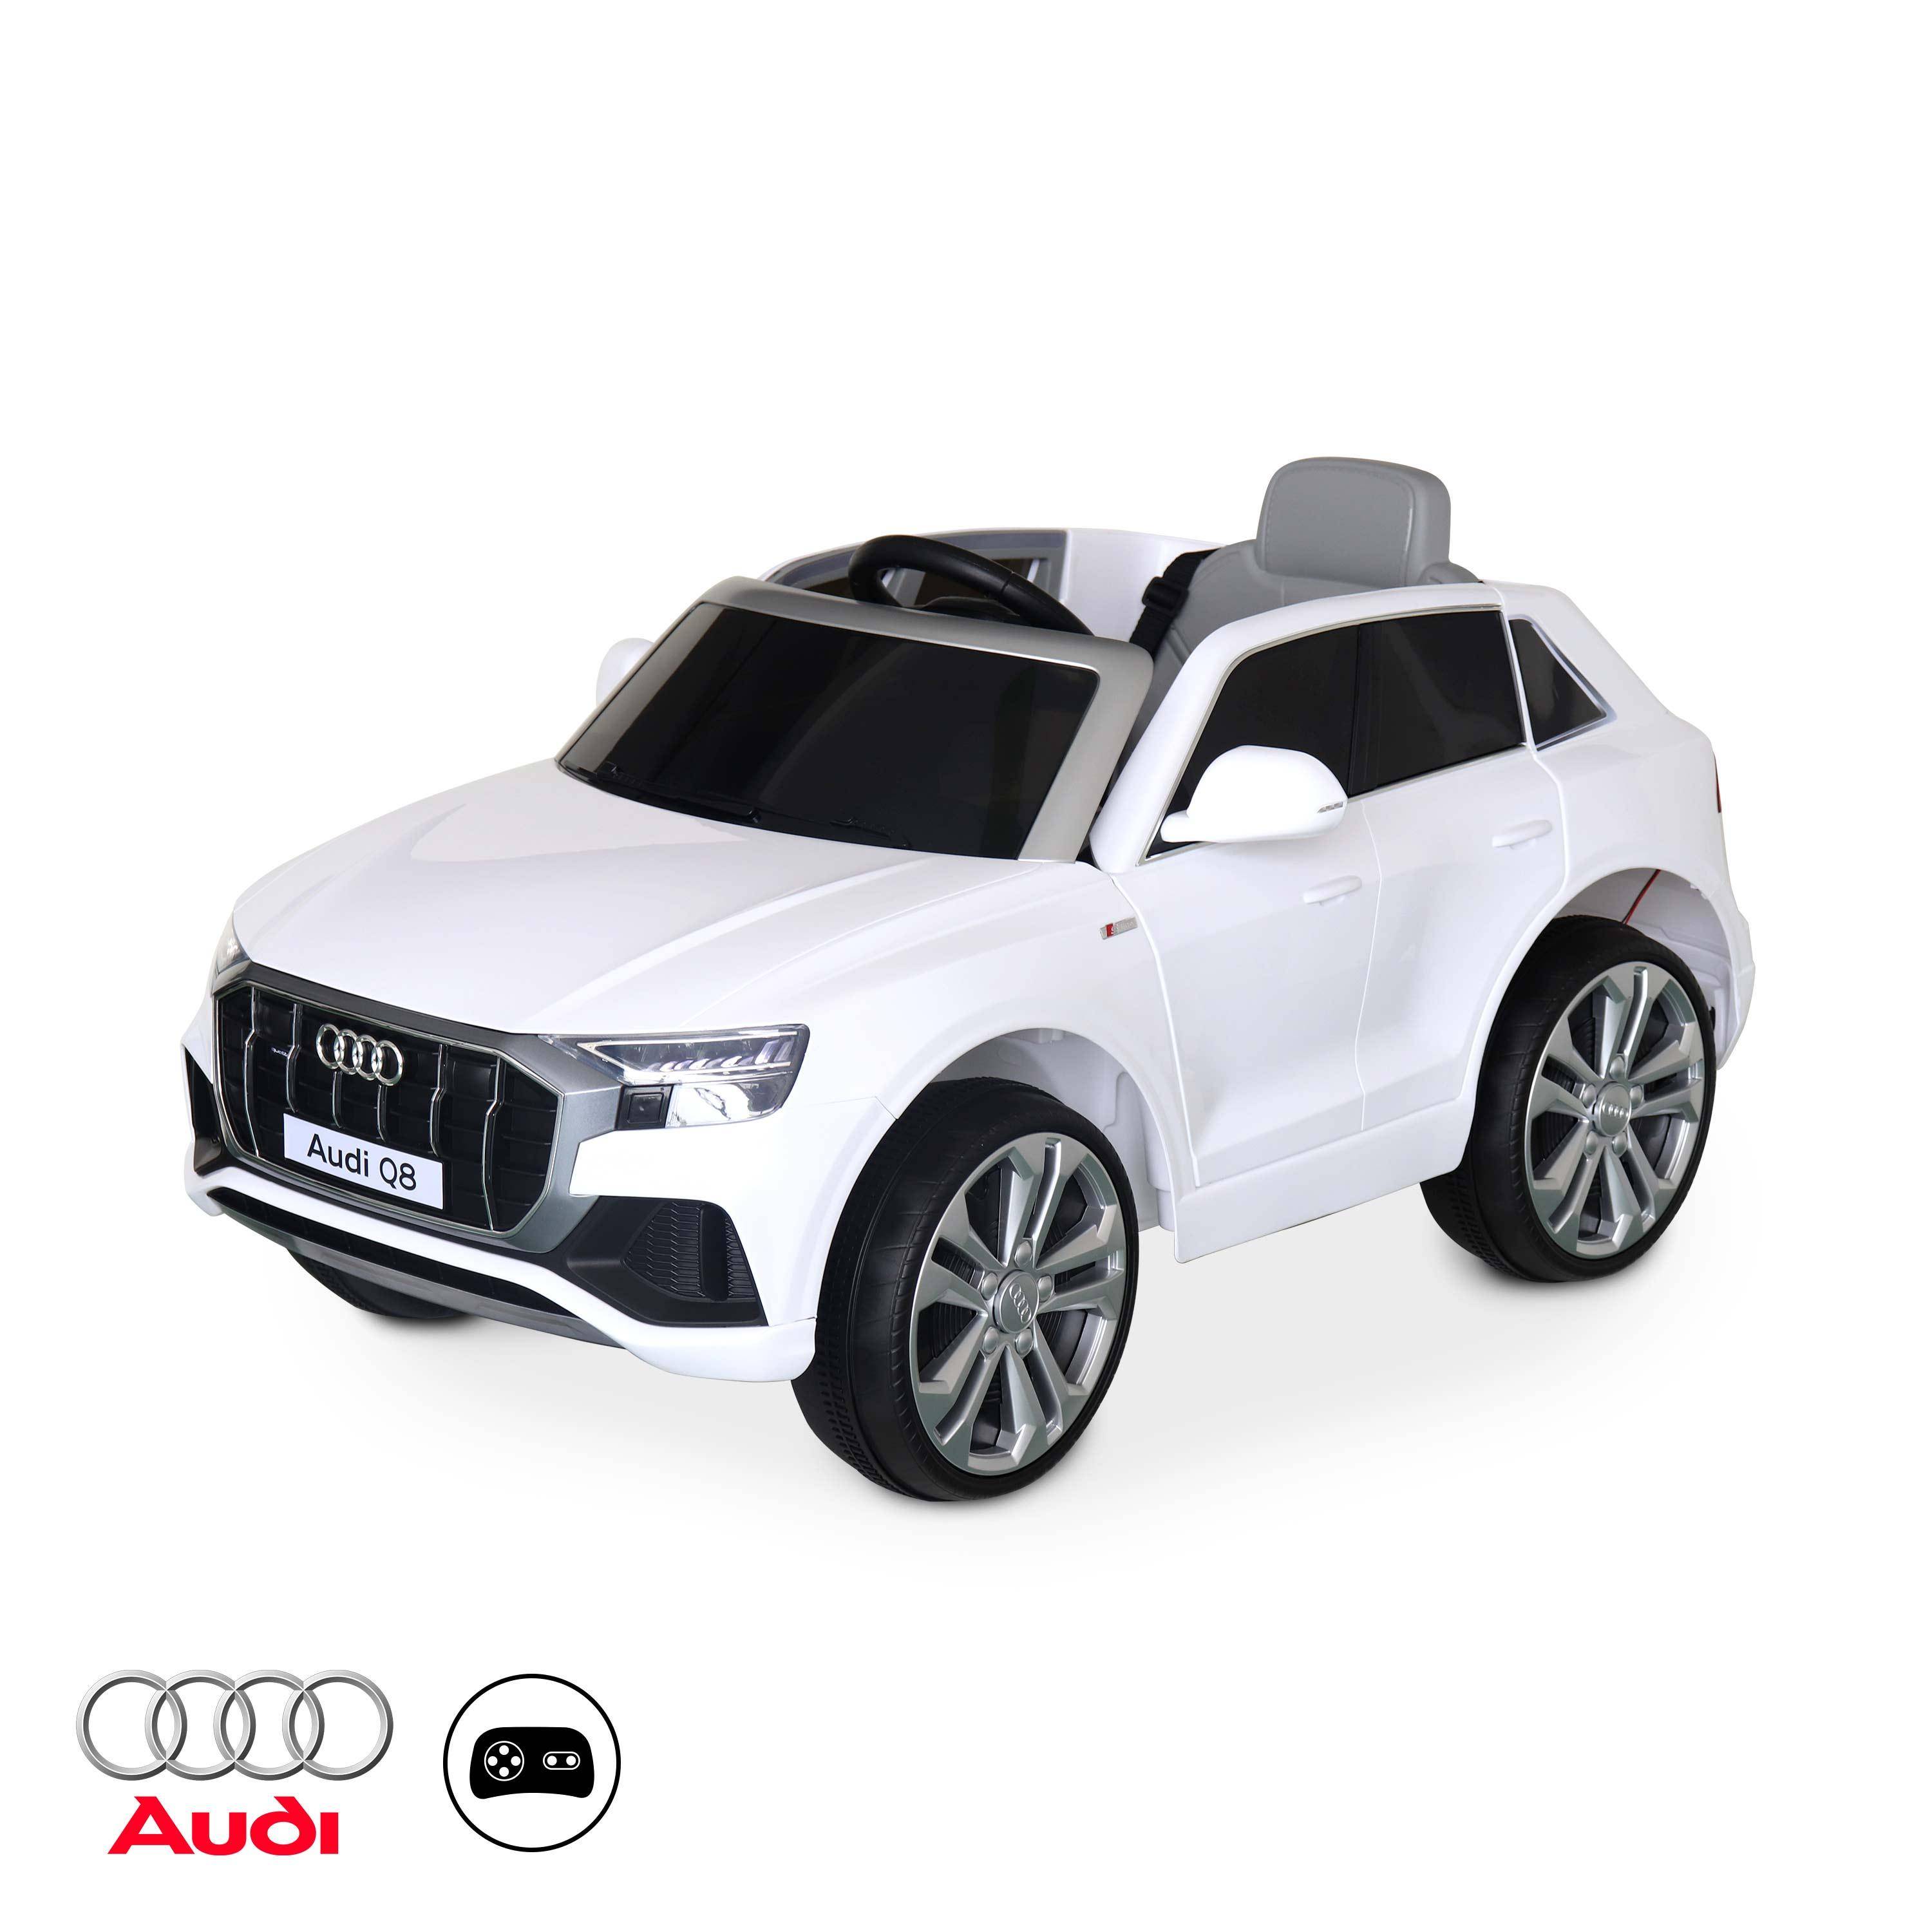 Children's electric car 12V, 1 seat with car radio and remote control - AUDI Q8 - White,sweeek,Photo1